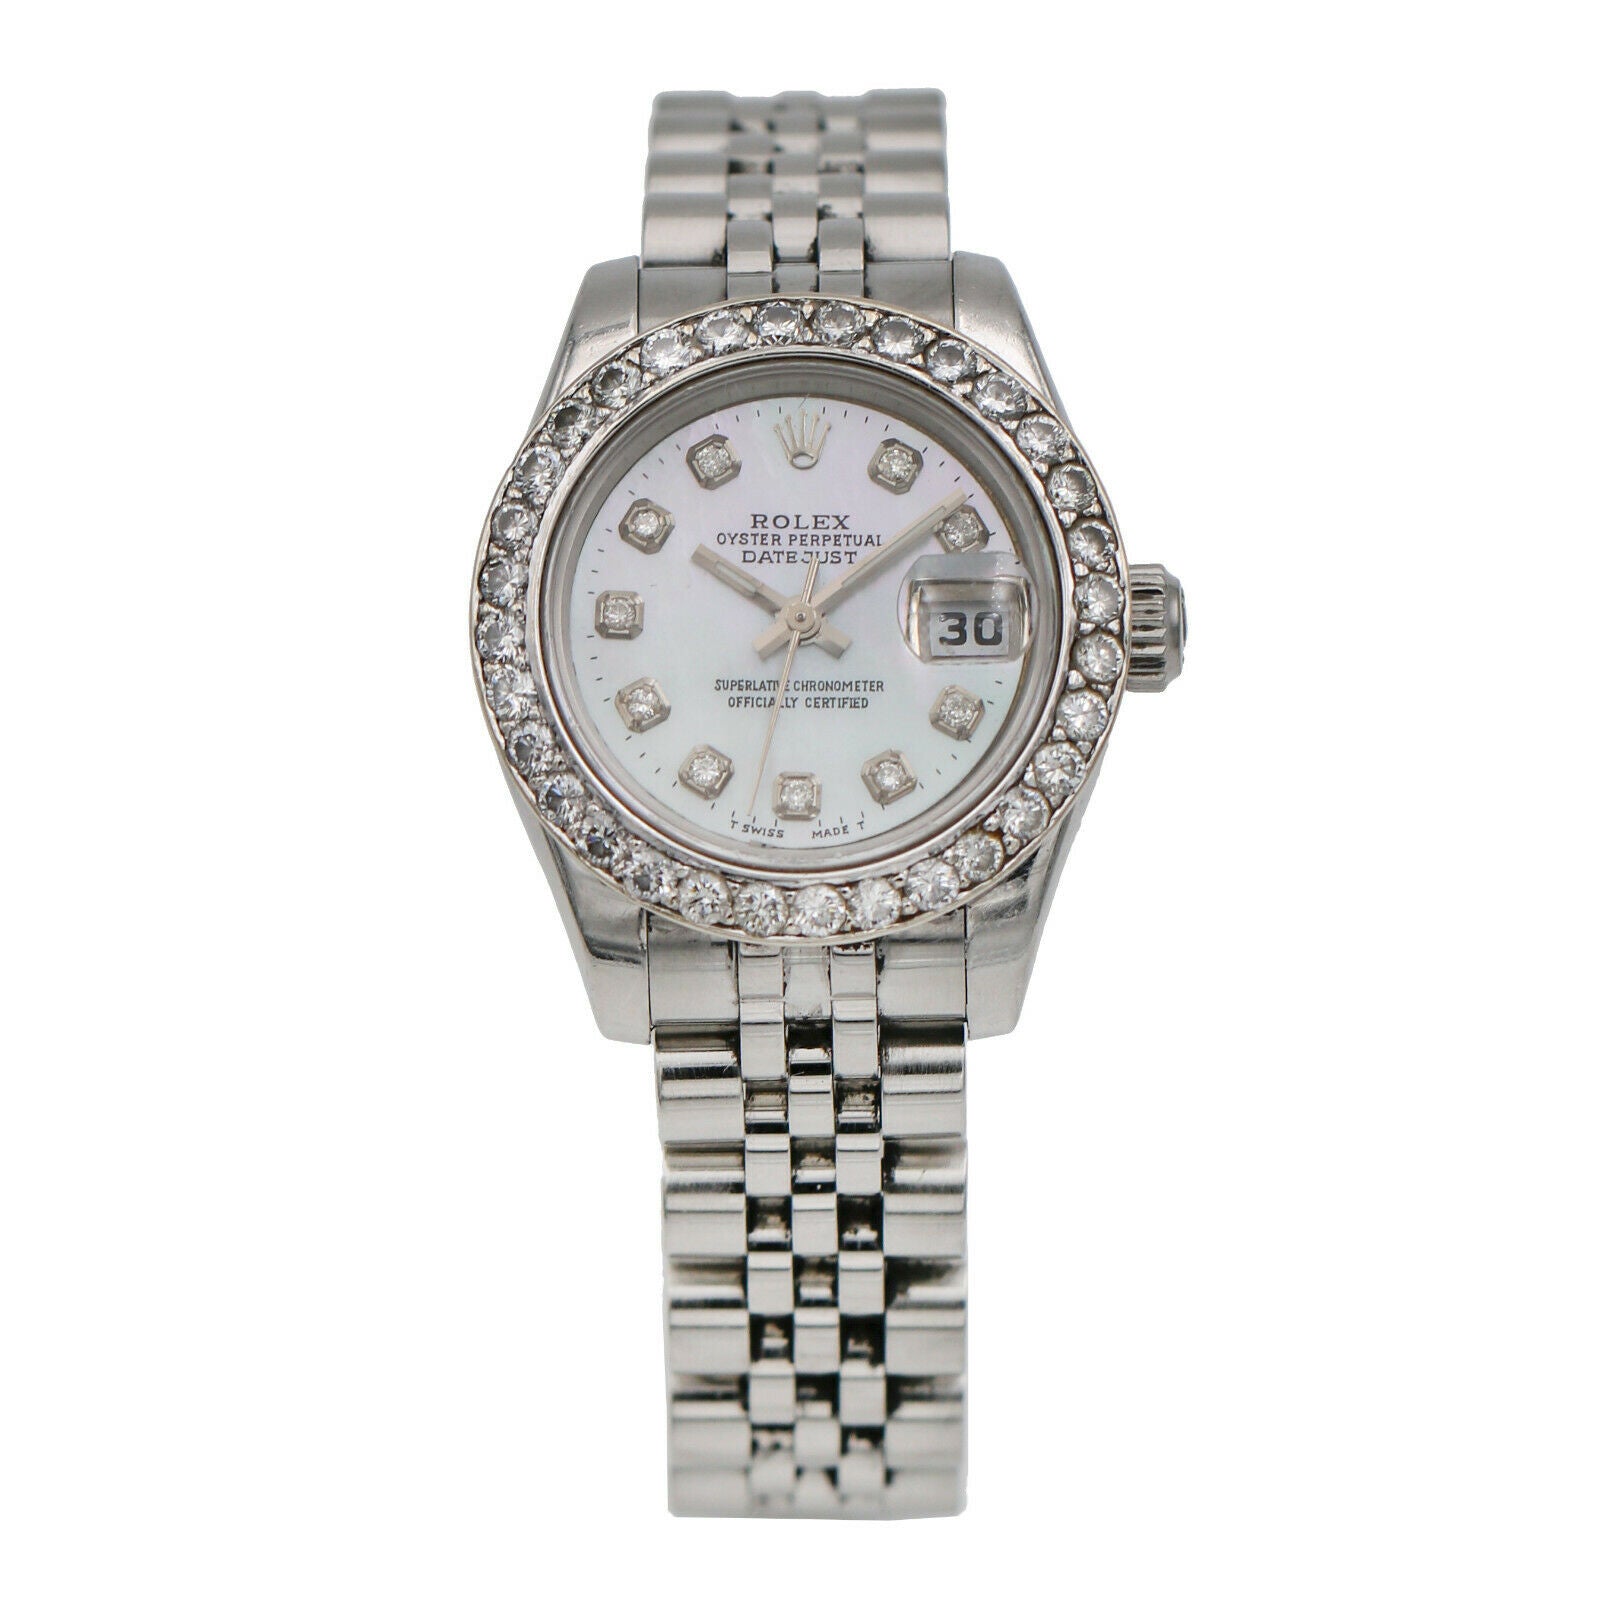 Rolex Lady-Datejust Watch 179160 Custom Diamond Bezel and Mother of Pearl Dial